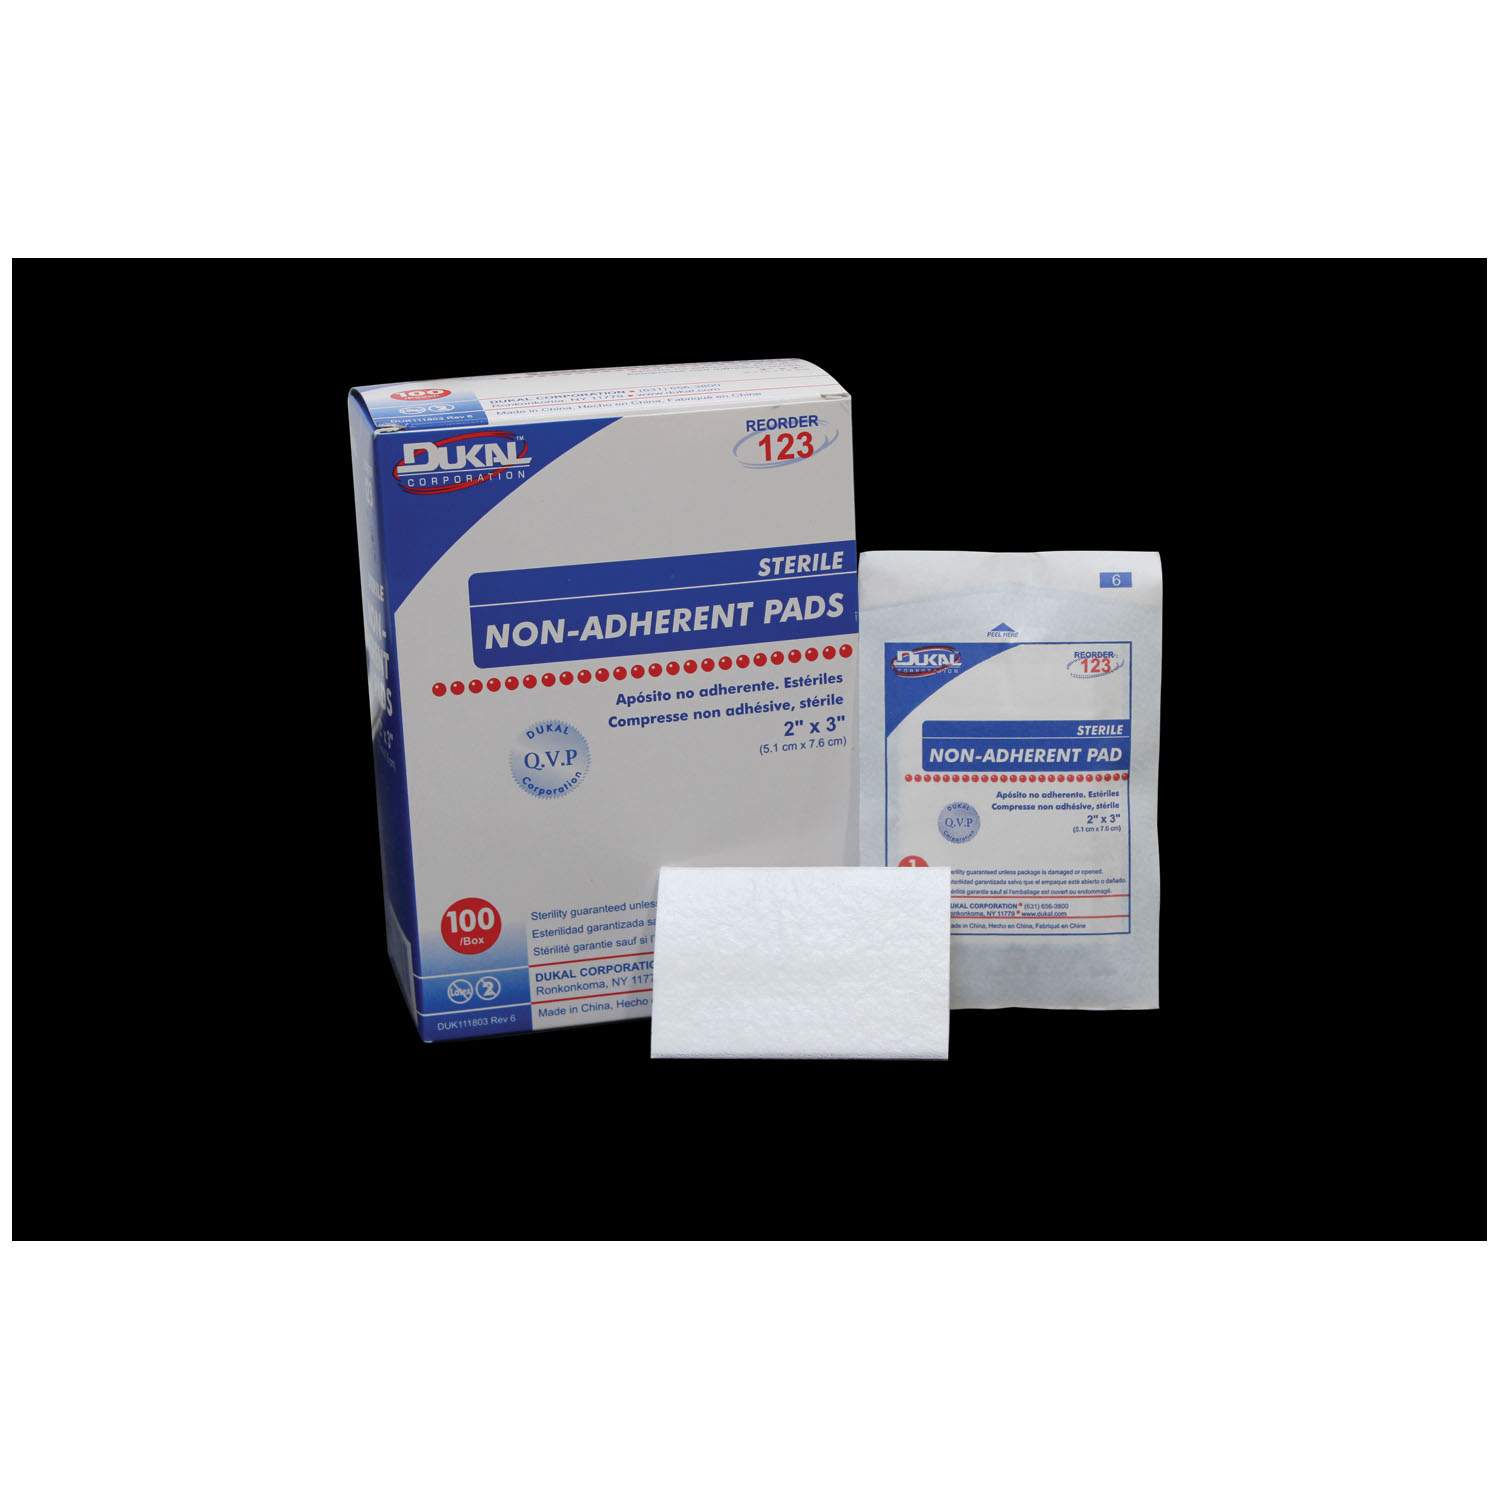 DUKAL NON-ADHERENT PADS : 123 BX $8.16 Stocked